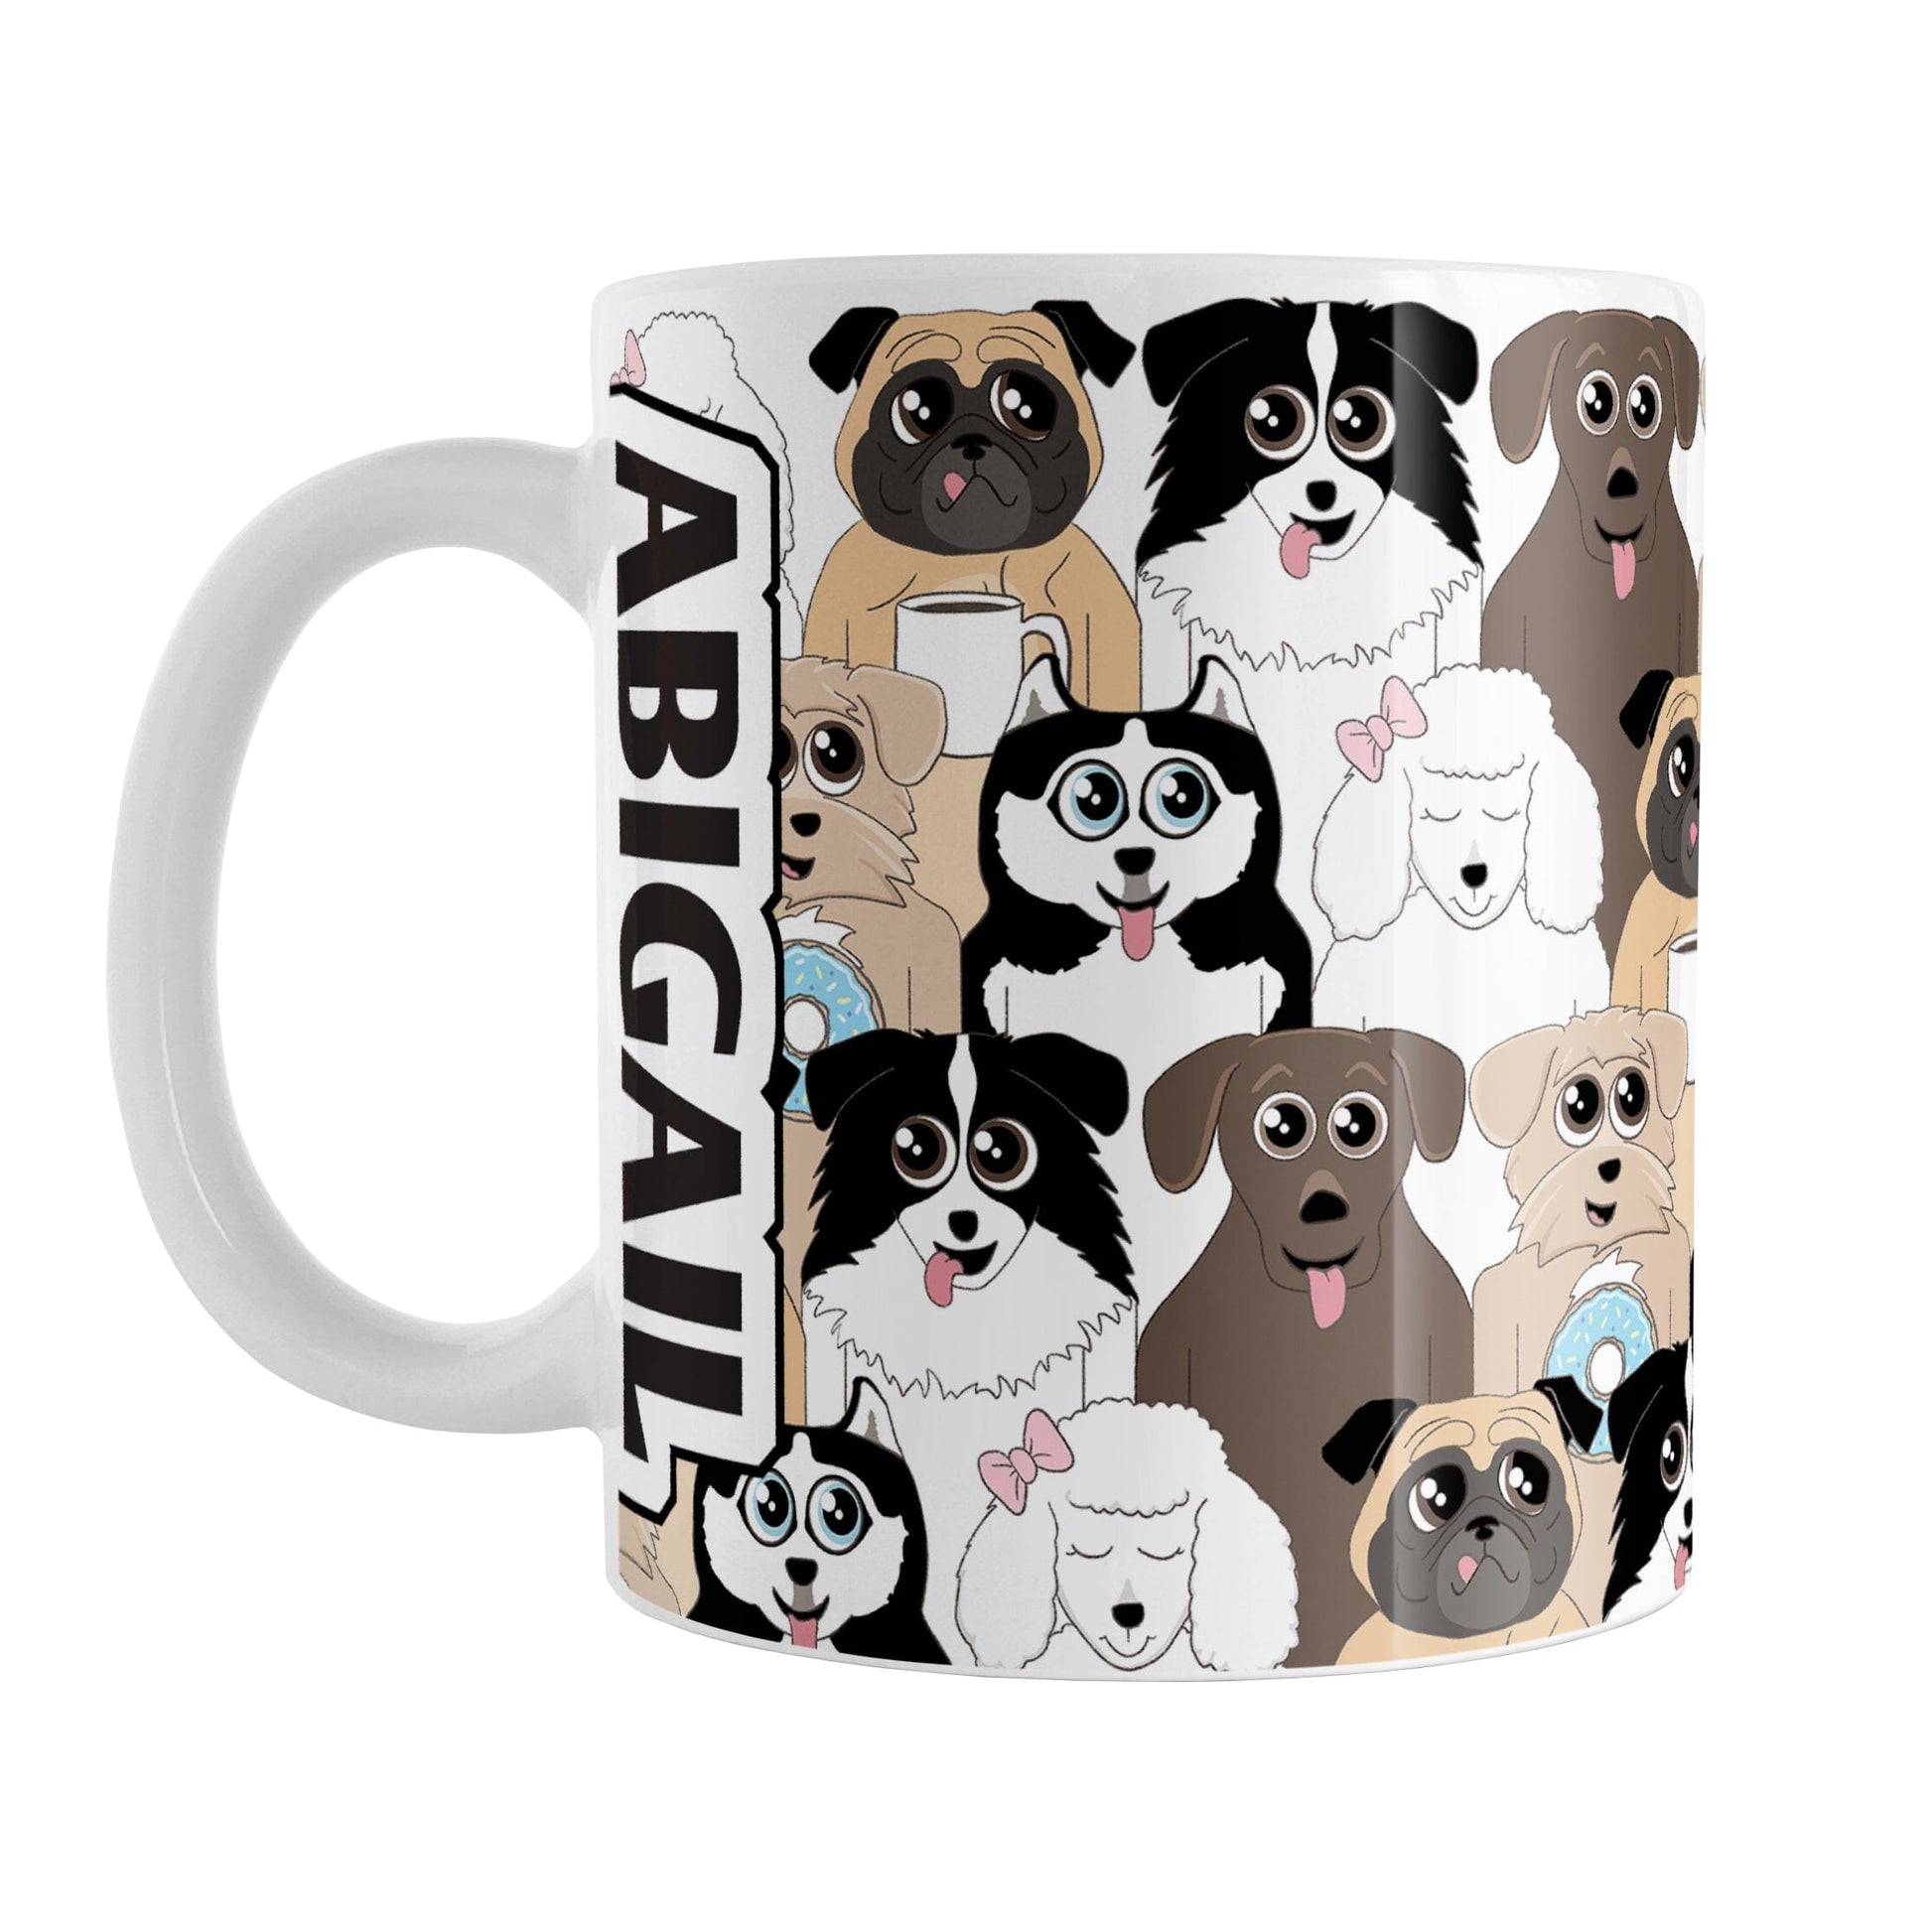 Personalized Cute Dog Stack Pattern Mug (11oz) at Amy's Coffee Mugs. A ceramic coffee mug designed with an illustrated pattern of different breeds of dogs with different fun expressions, some with coffee or donuts. This stacked pattern of dogs wraps around the ceramic mug to the handle where your name is custom printed in black on white vertically at the edge of the design.